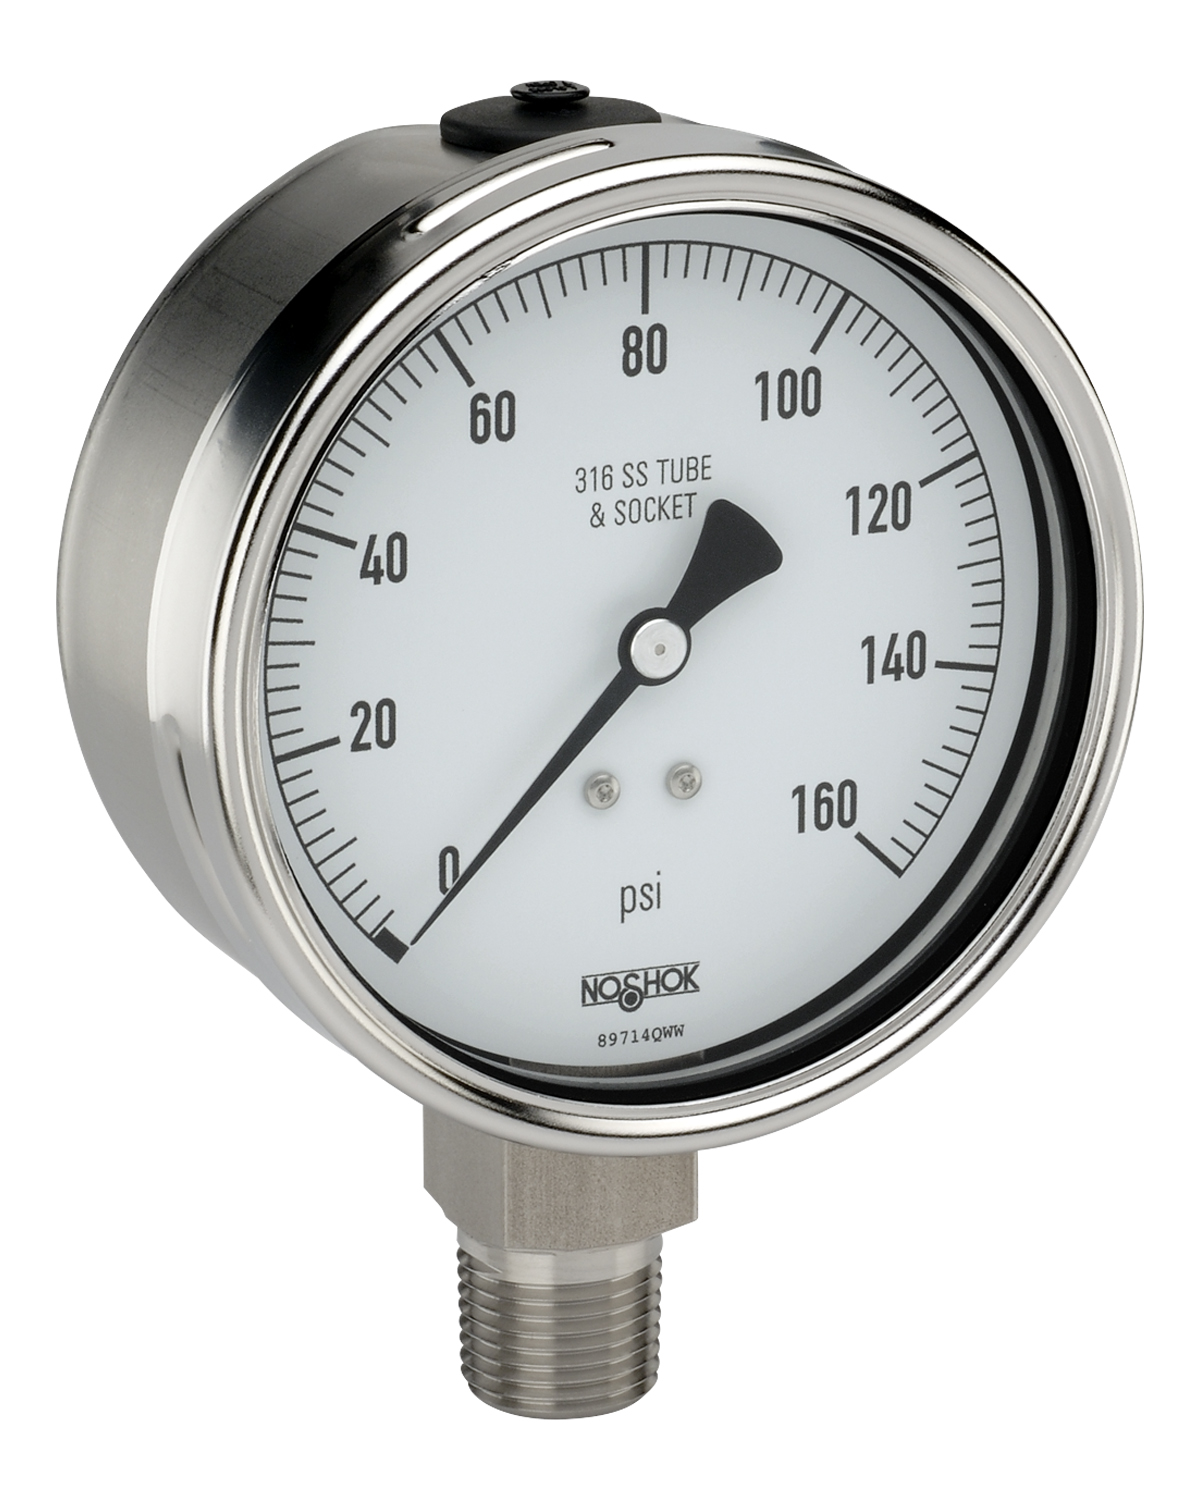 40-500-30-psi-1/4 400/500 Series All Stainless Steel Dry and Liquid Filled Pressure Gauges